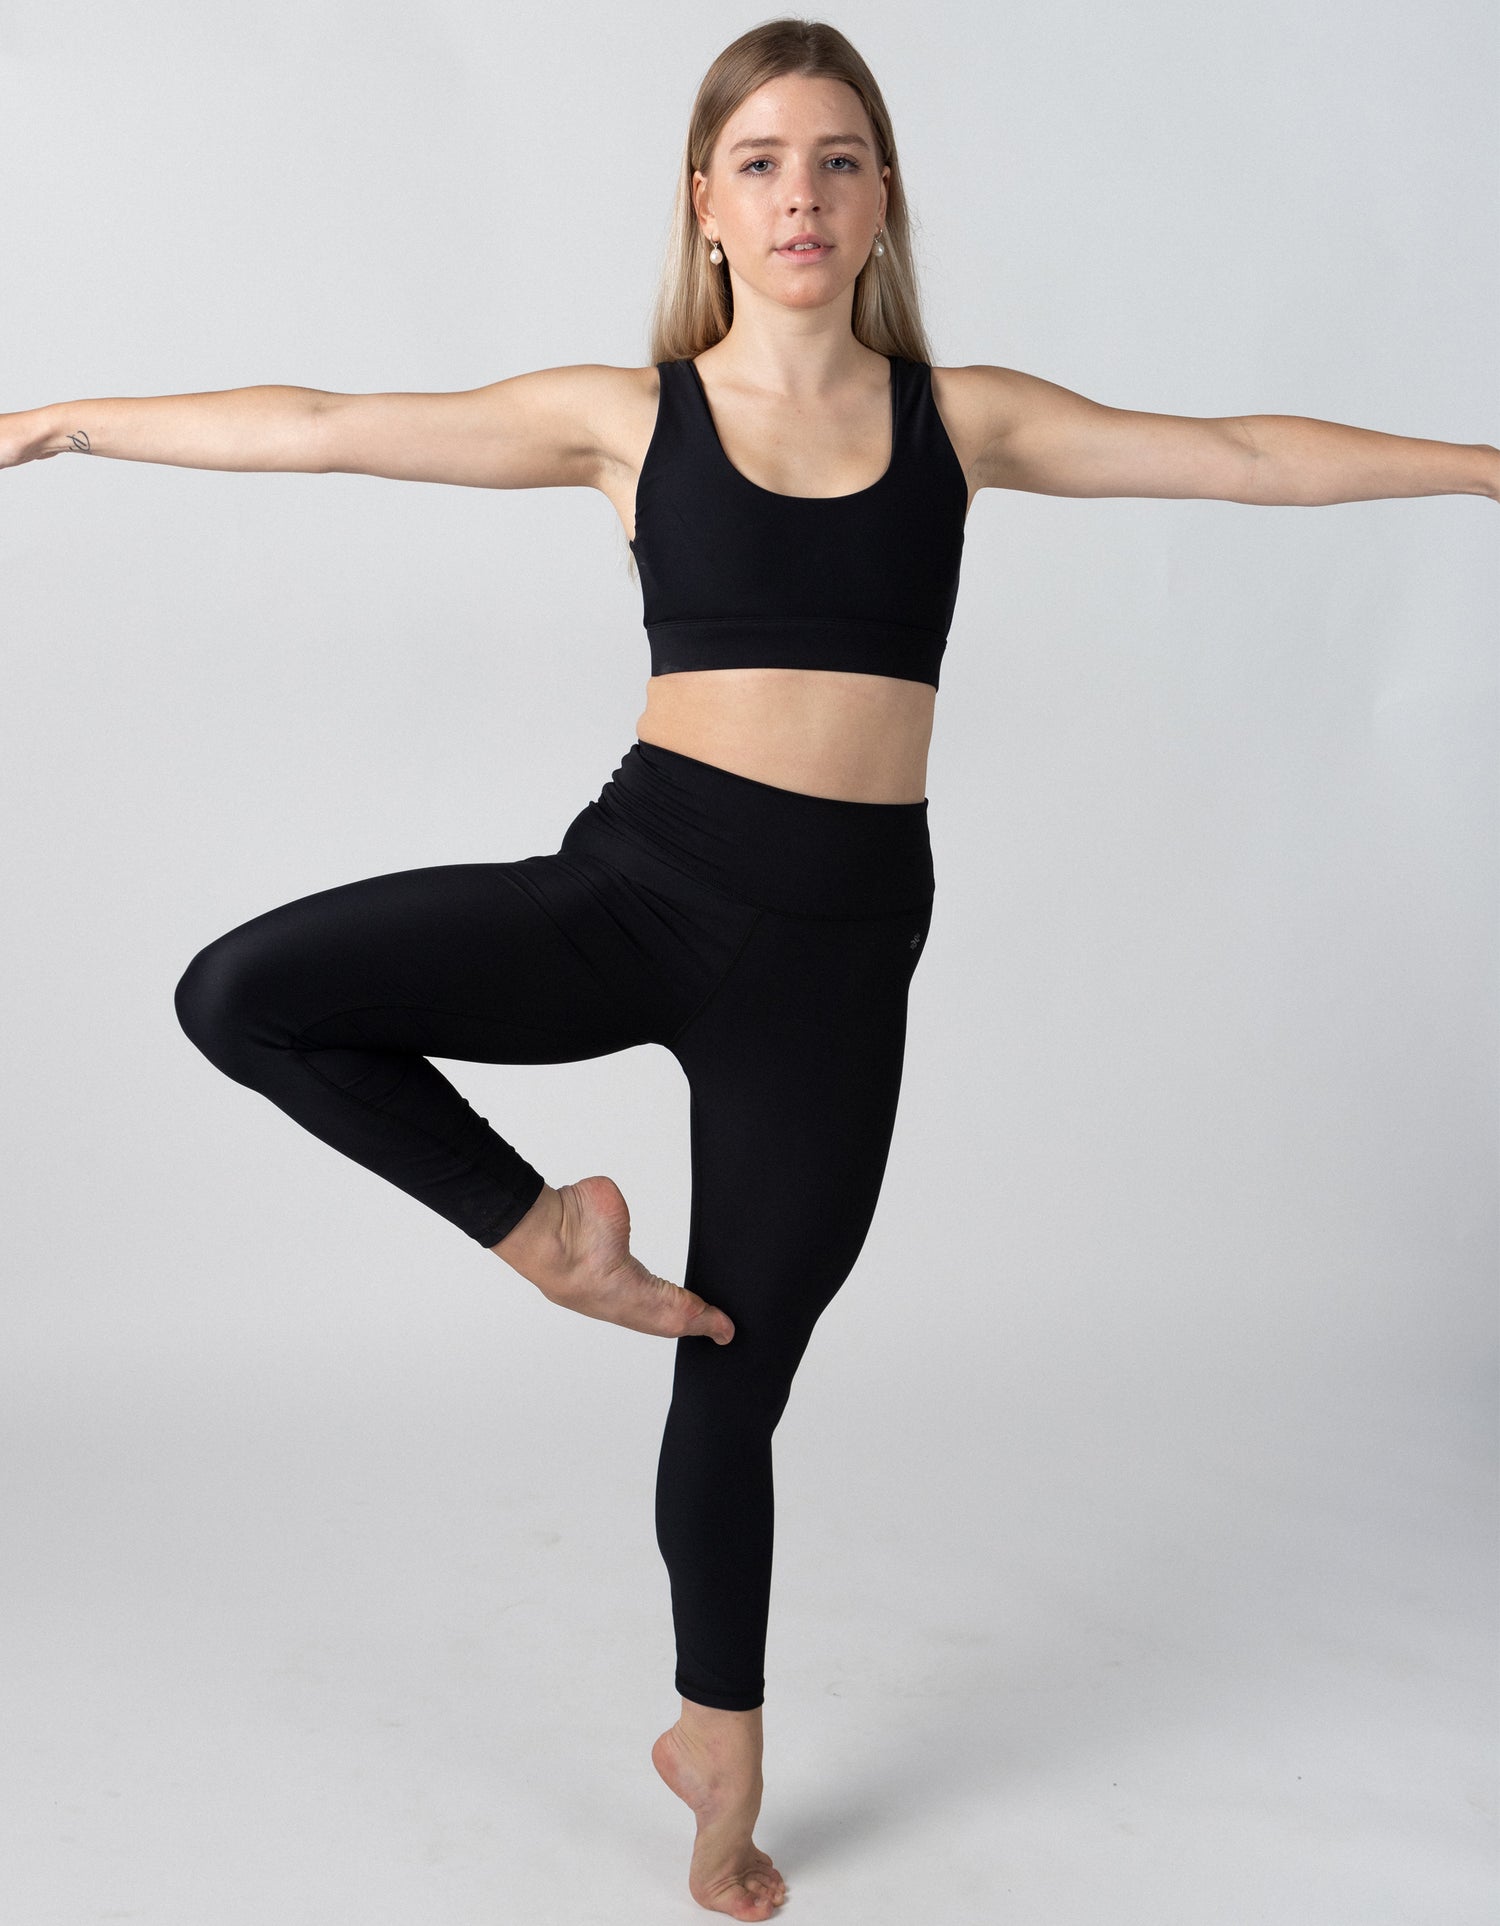 HIGH-RISE DREAMER LEGGING in black made from recycled polyester / creora power fit spandex. XS - XL